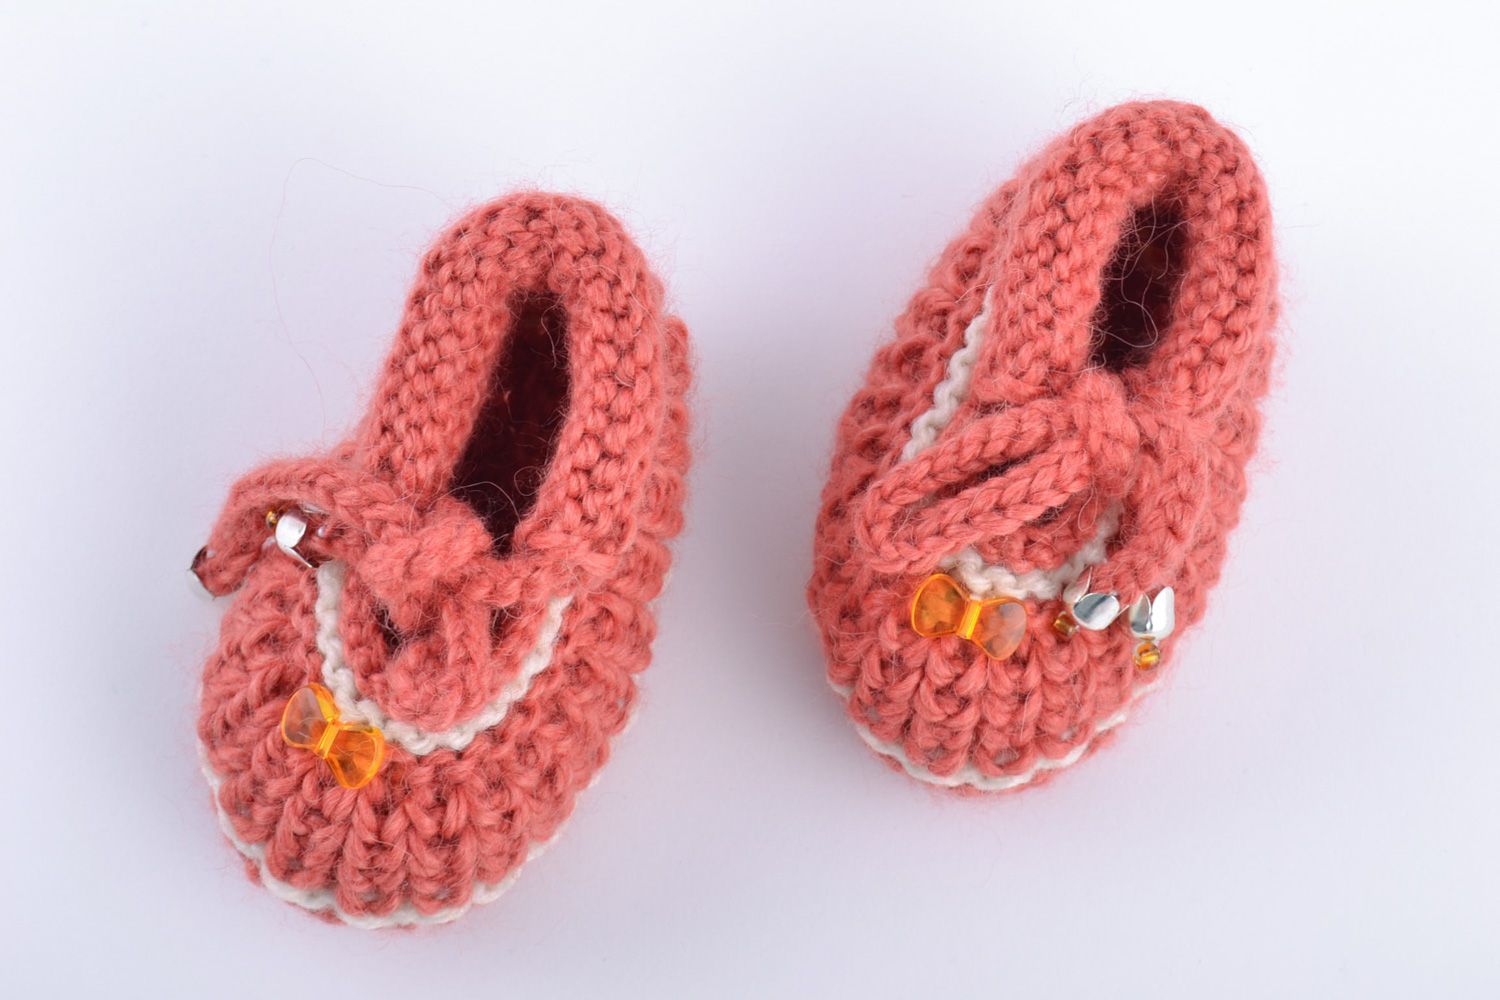 Handmade dark pink warm and soft baby booties knitted of wool for little girl photo 2